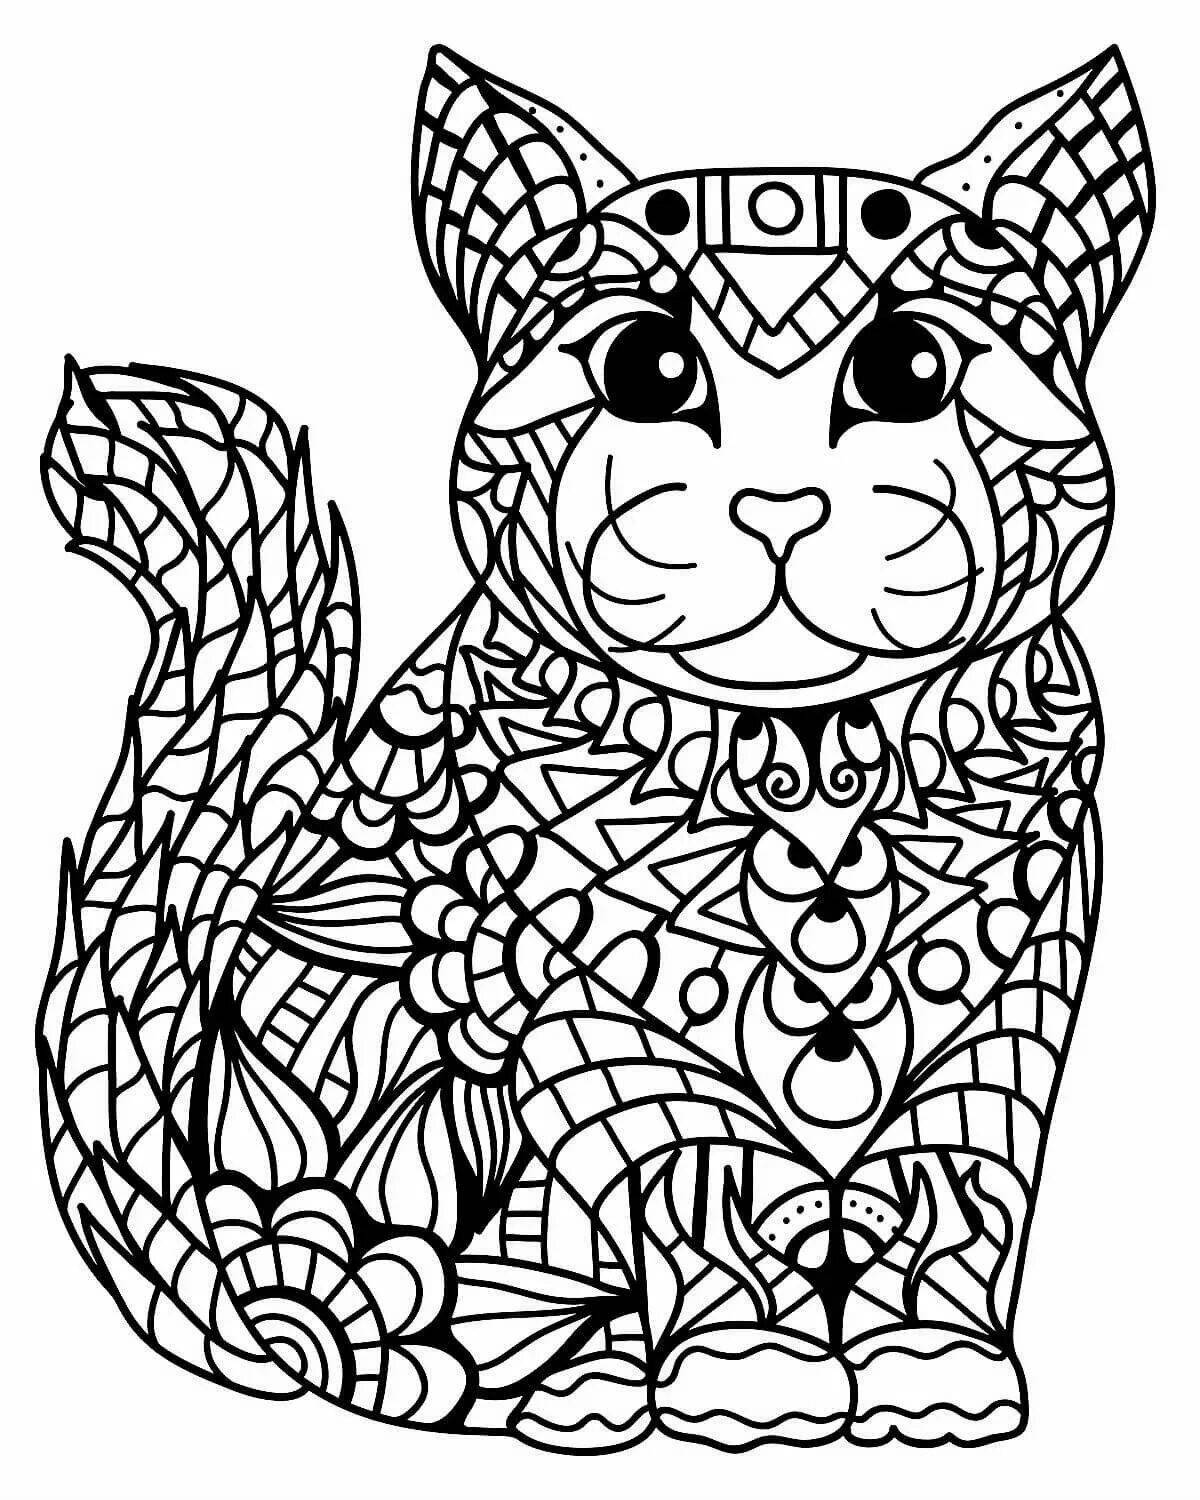 Fairytale antistress coloring book for girls cats